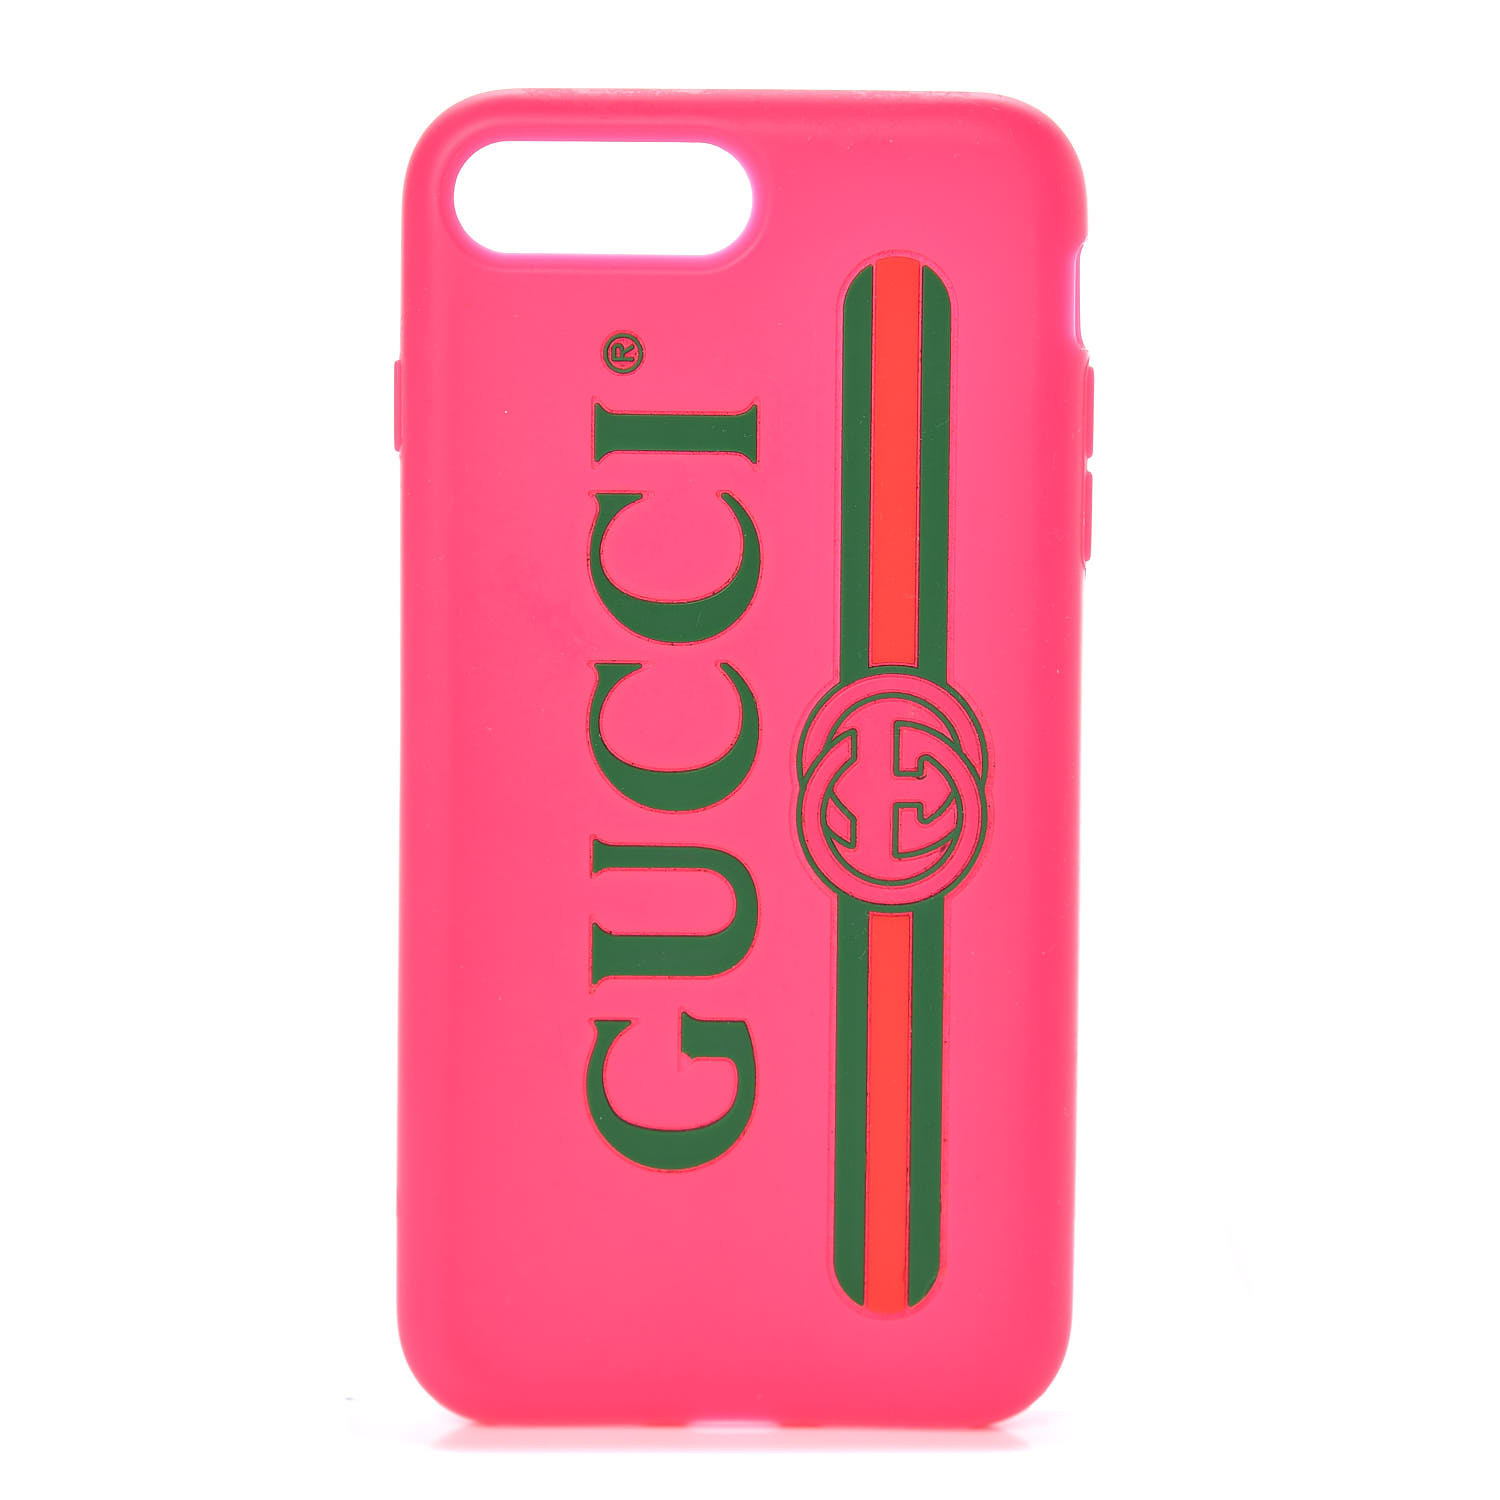 gucci phone case pink, OFF 79%,www 